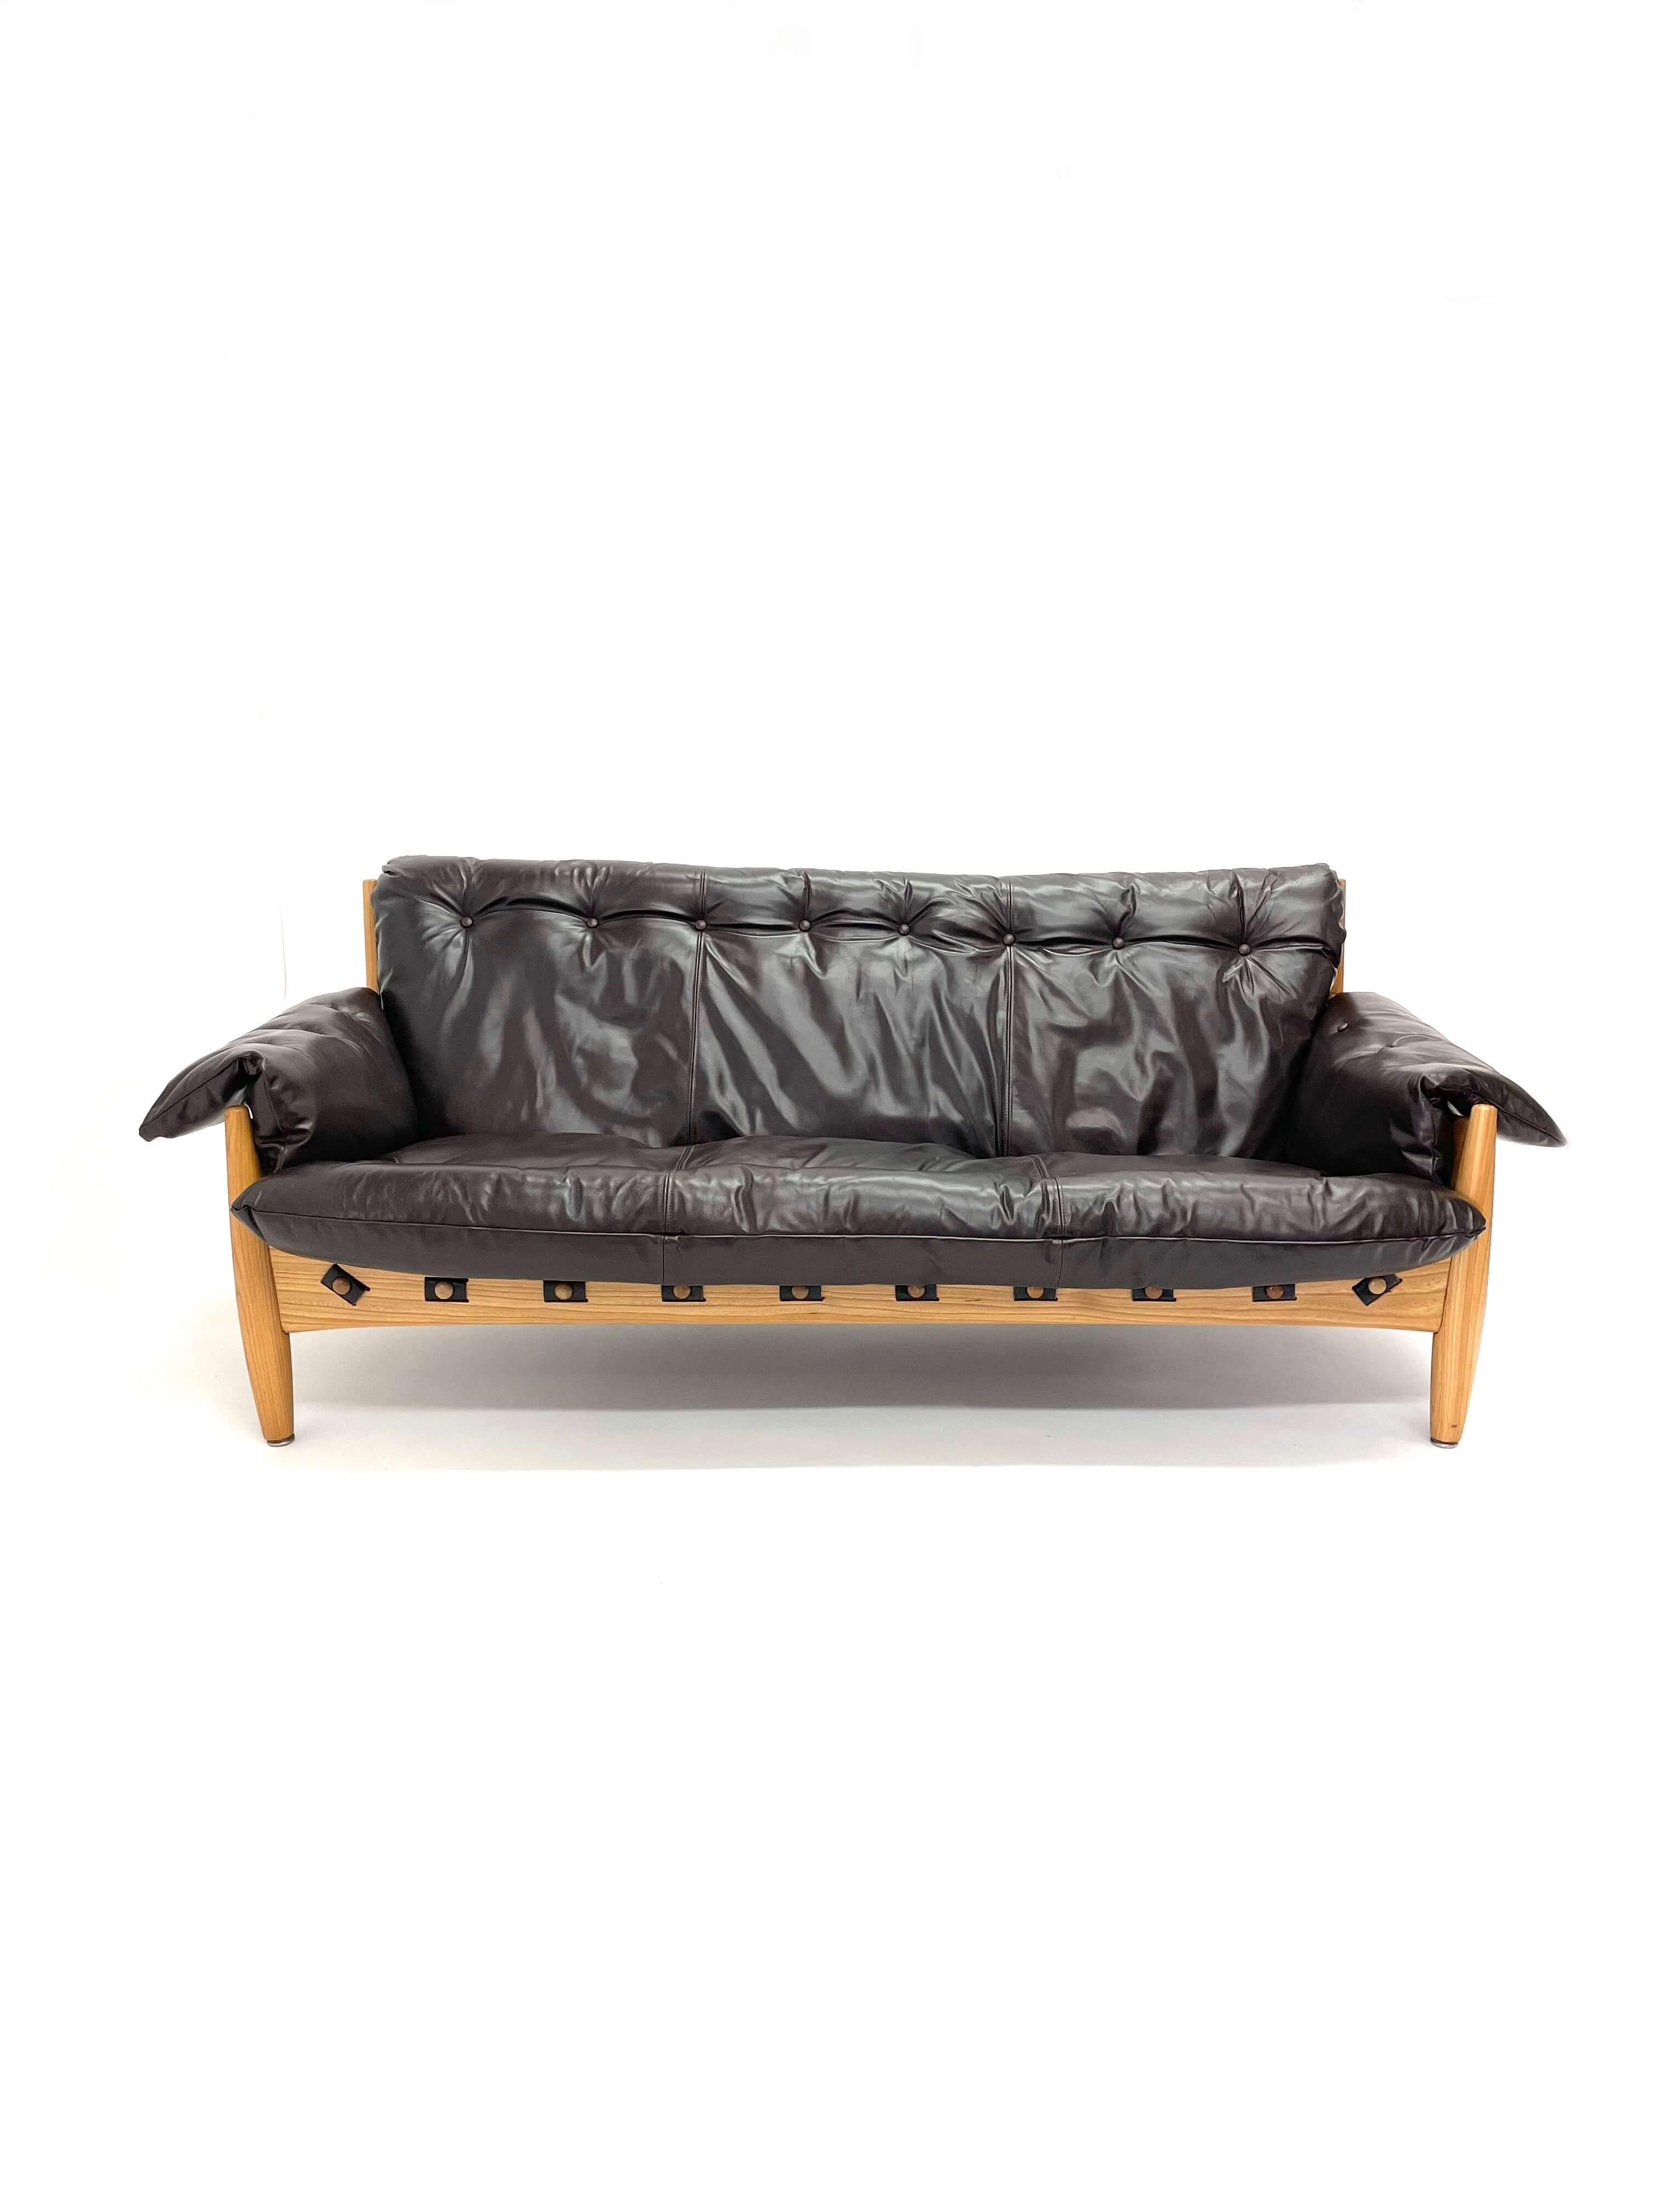 Comfortable 3 seater 'Sheriff' sofa by Brazilian designer Sergio Rodriques. This classic sofa was manufactured by ISA in Italy under license by Sergio Rodrigues. This sofa embodies the best of classic Brazilian modern furniture design. With its